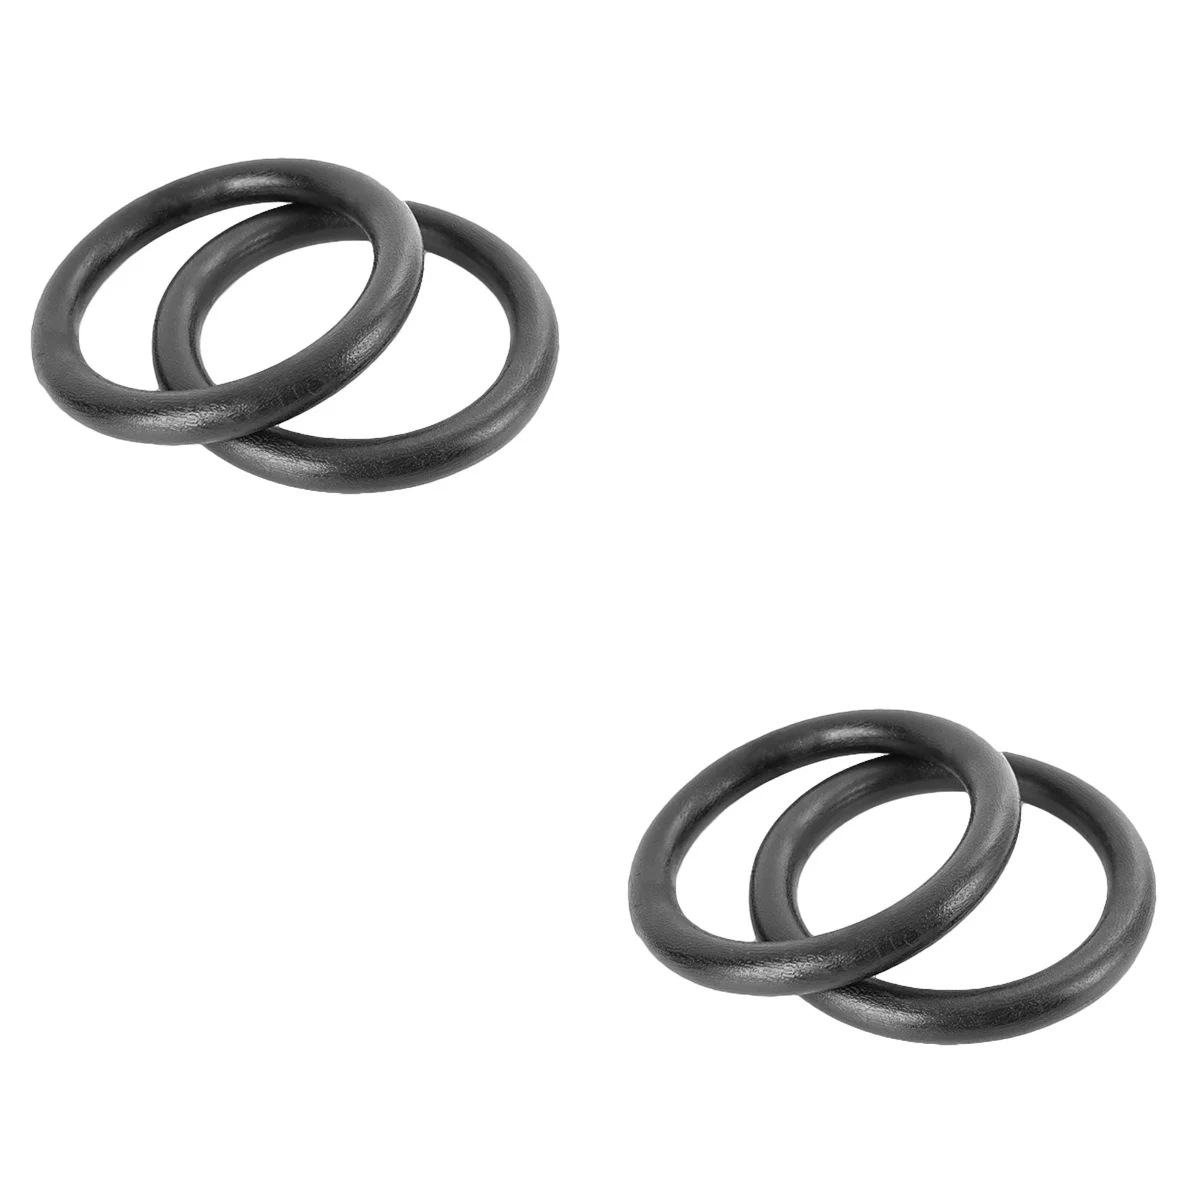 

2 Pairs ABS Fitness Gym Rings Gymnastic Rings Pull-up Rings for Body Strength Power Chin Up Training Workout (Black)